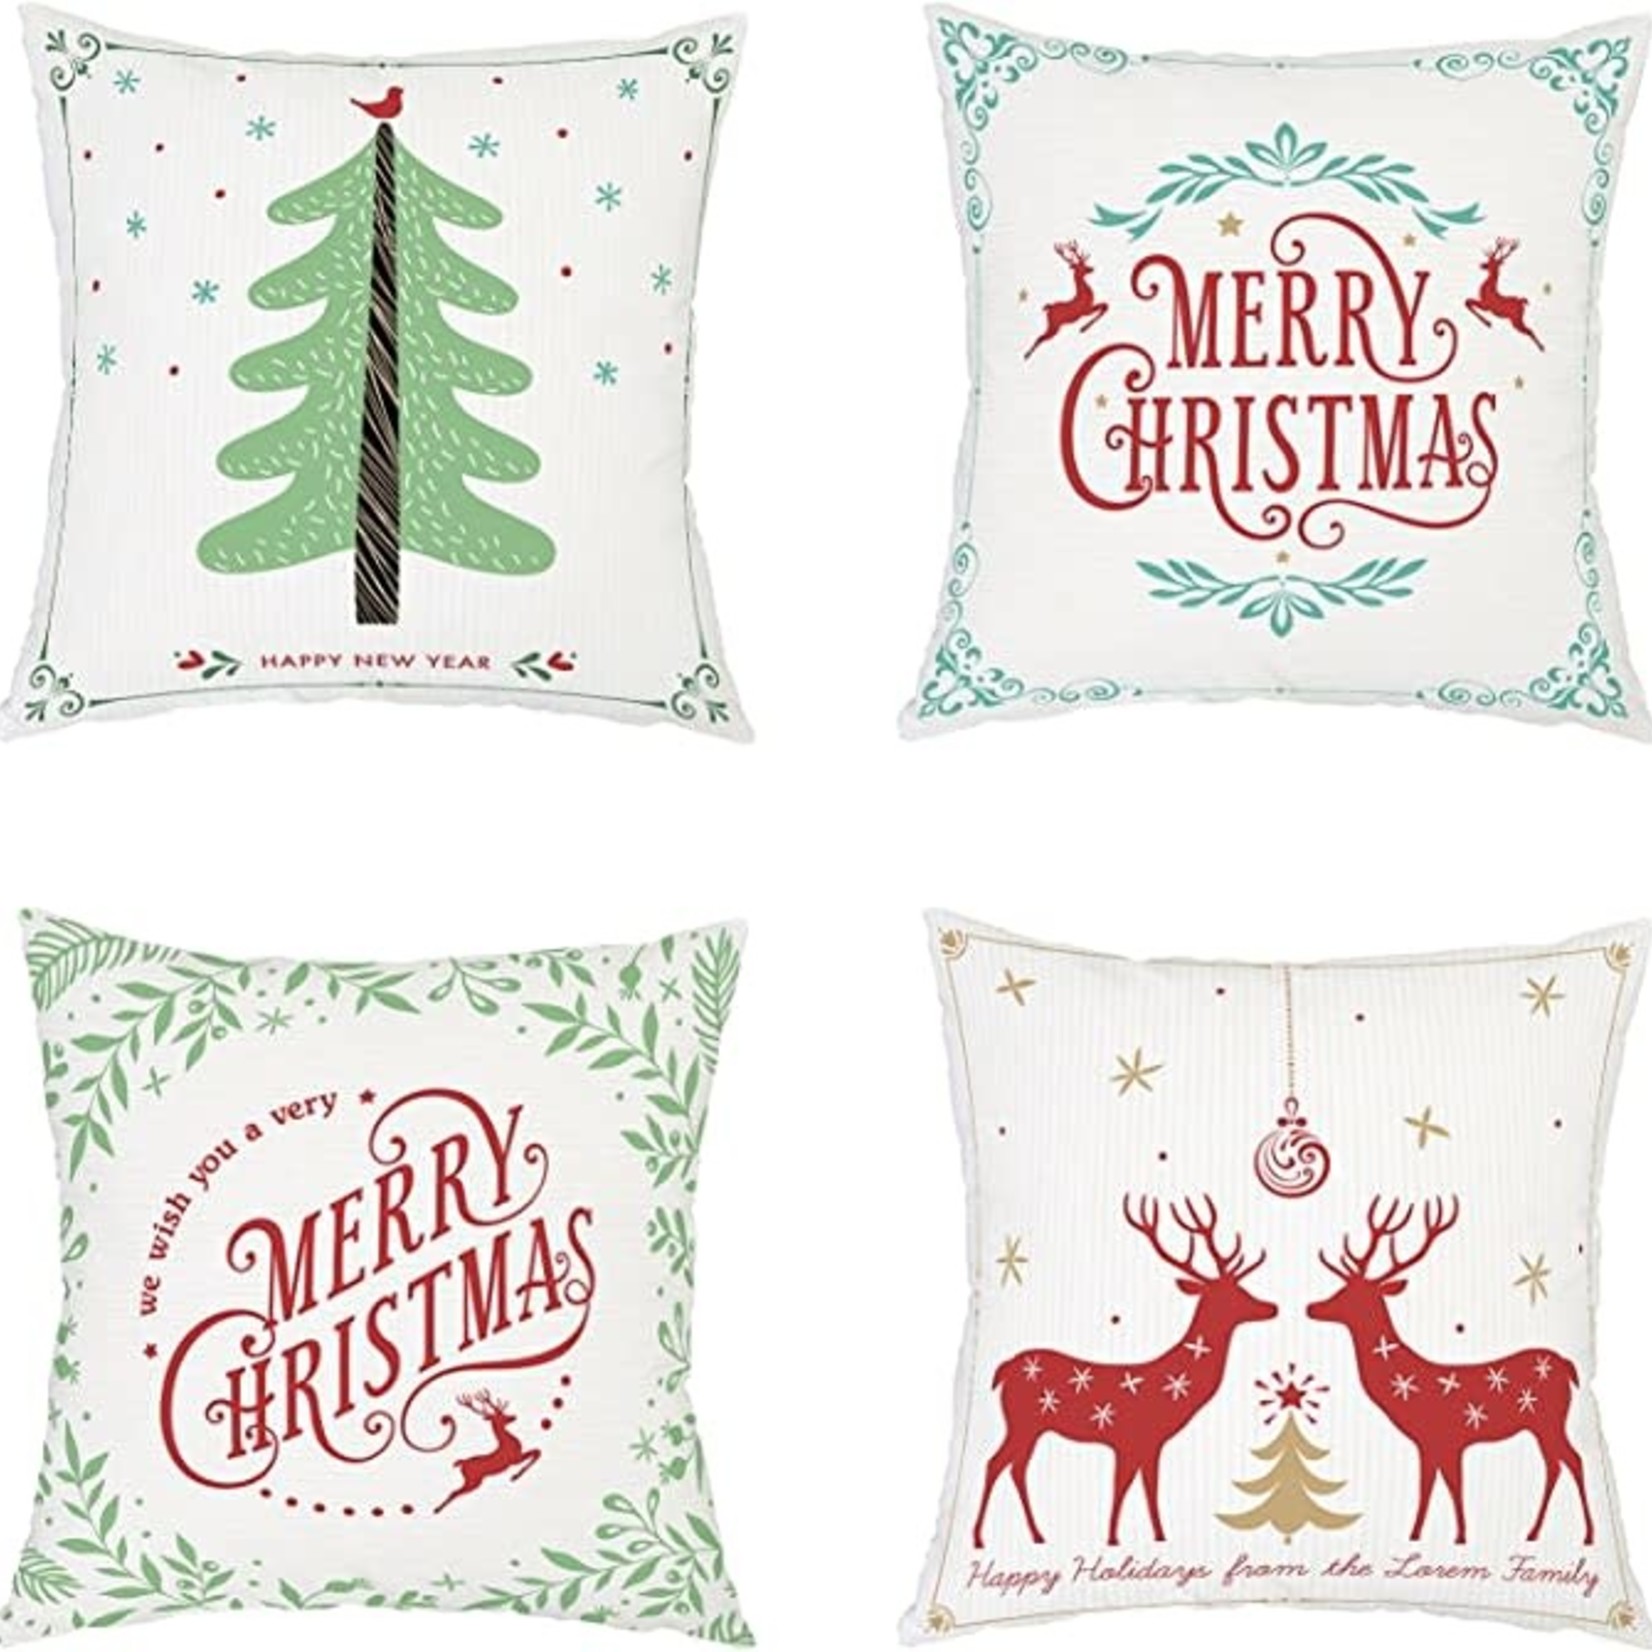 PAflagRTY Merry Christmas Throw Pillow Covers 18x18